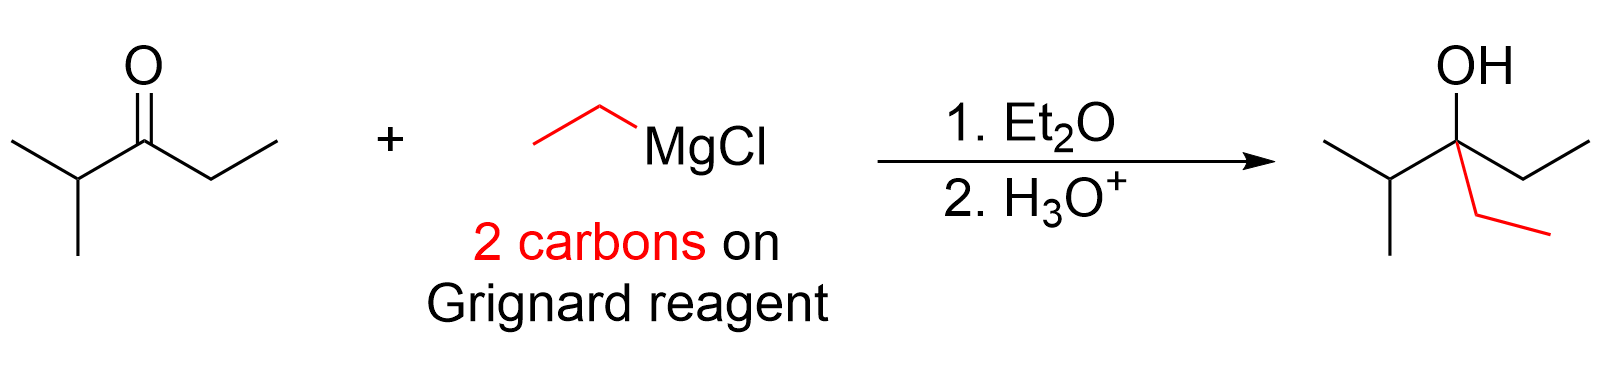 In reference to 3.6.b.i, the ketone reacts with ethyl magnesium bromide (ethyl Grignard) in ether followed by a second step of acid workup to form 3-ethyl-2-methylpentan-3-ol.